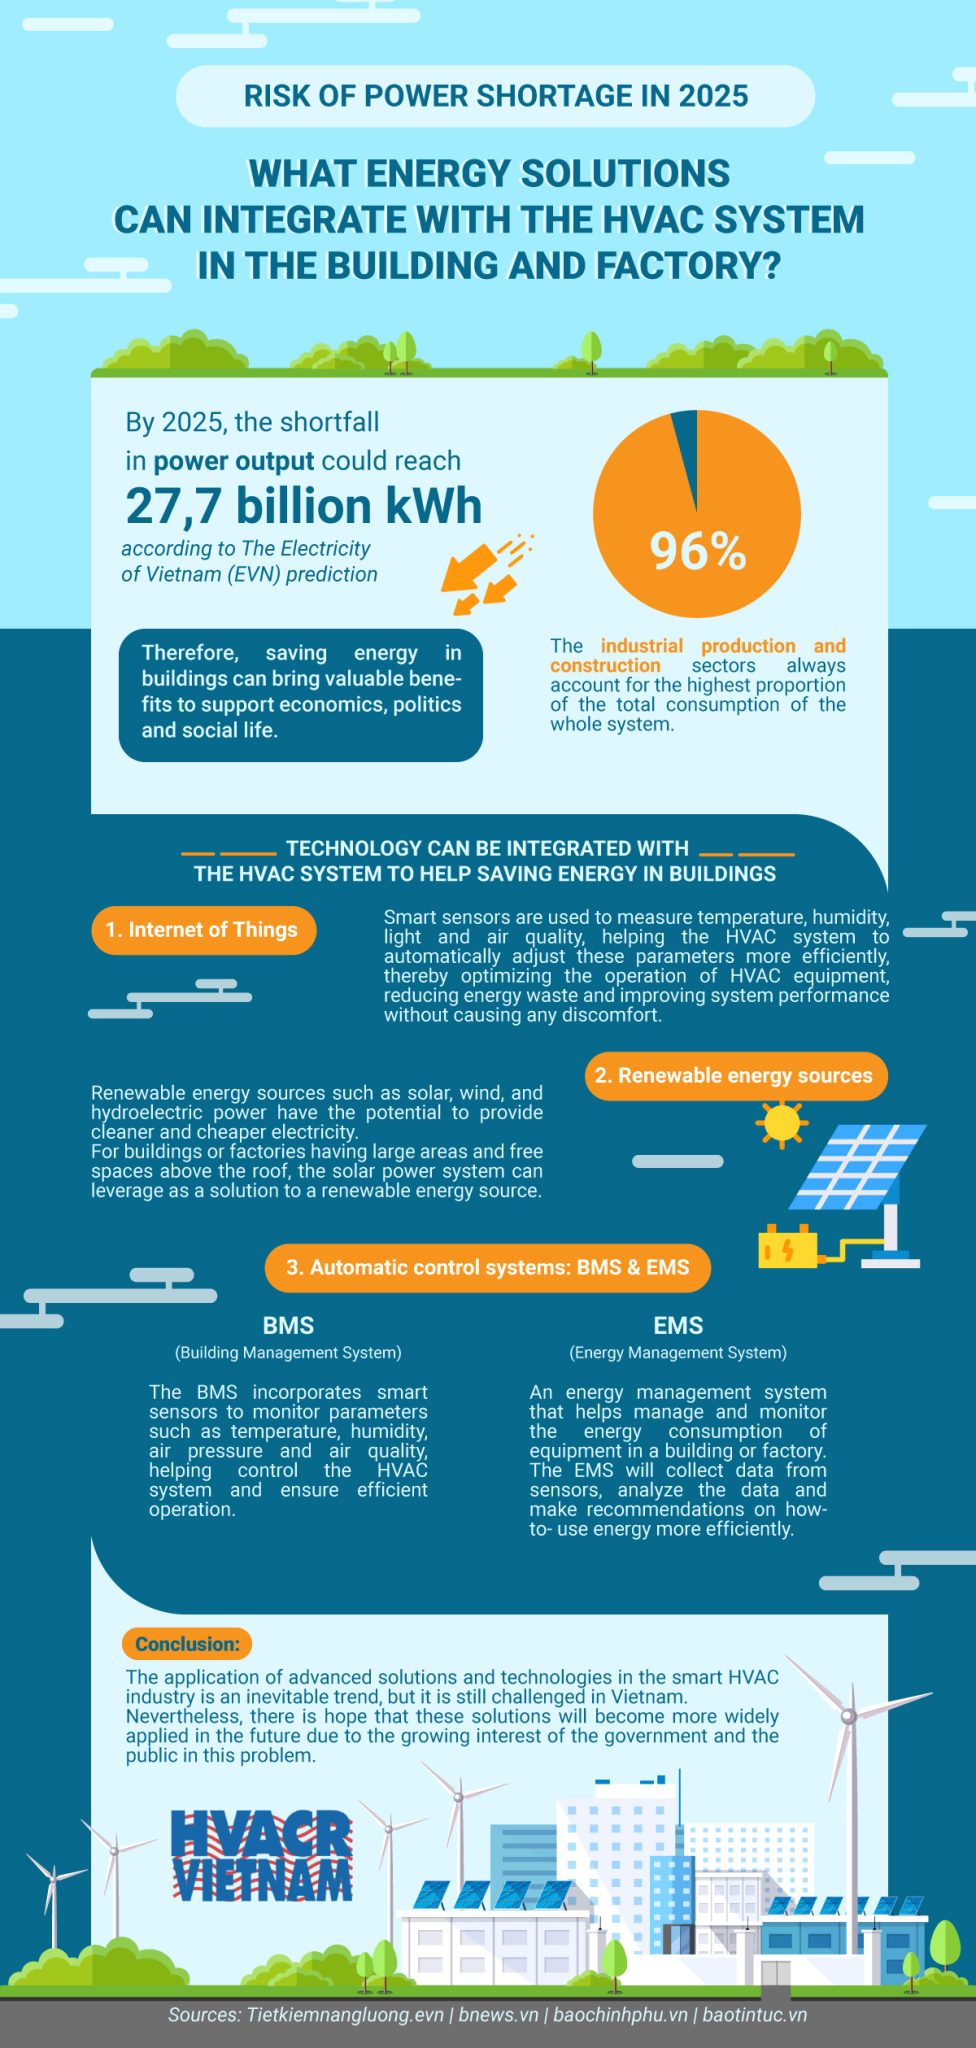 [INFOGRAPHIC] Risk of power shortage in 2025. What energy solutions can